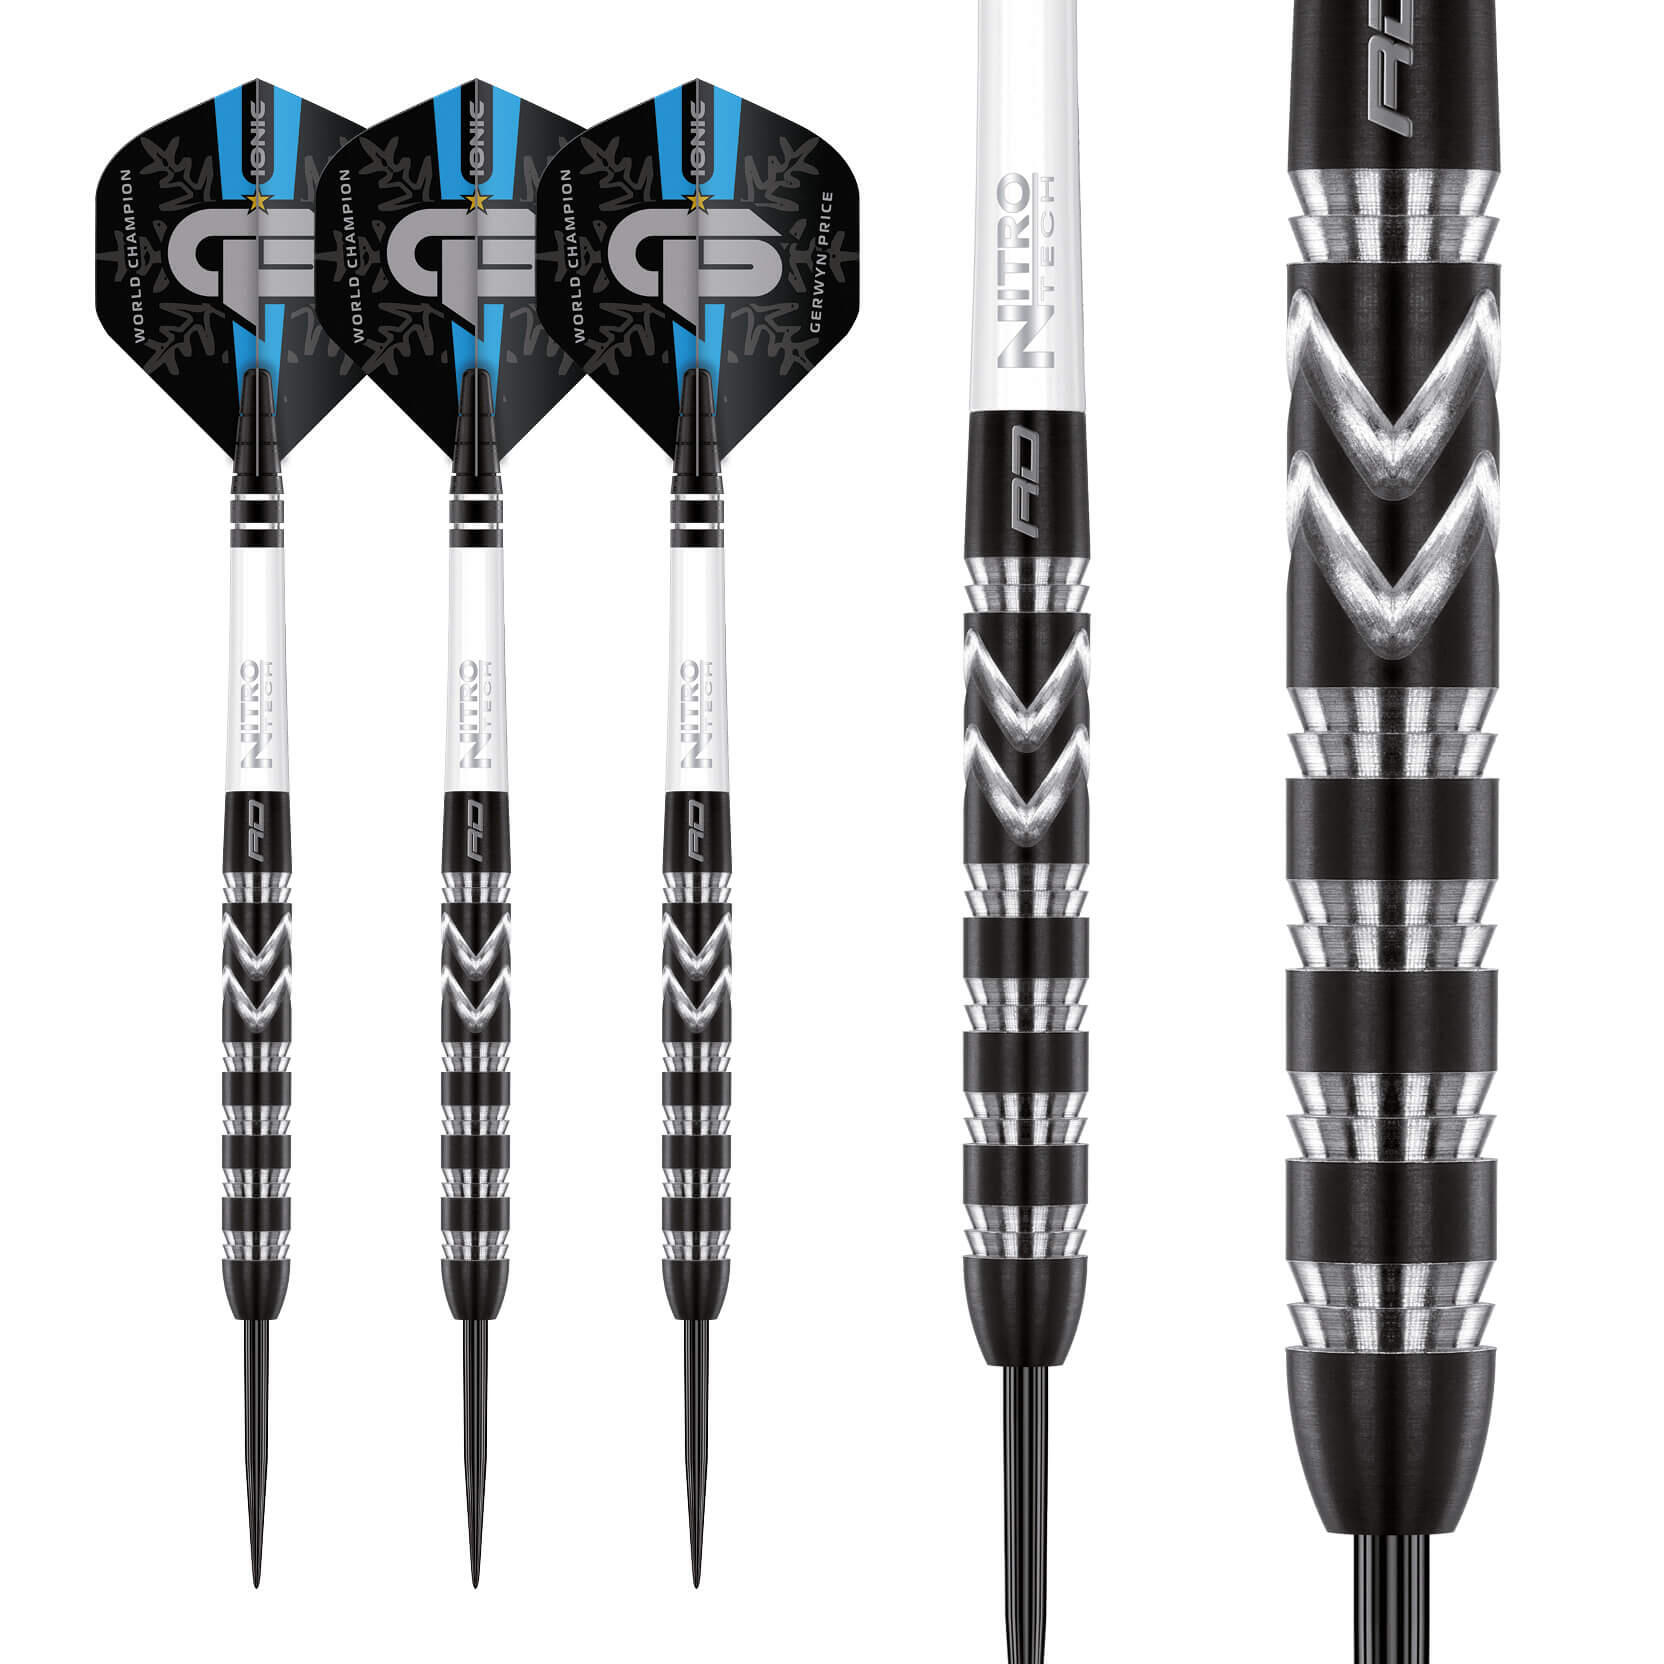 Red Dragon Gerwyn Price Iceman WC 24g Tungsten Darts Set with Flights and Stems 4/5